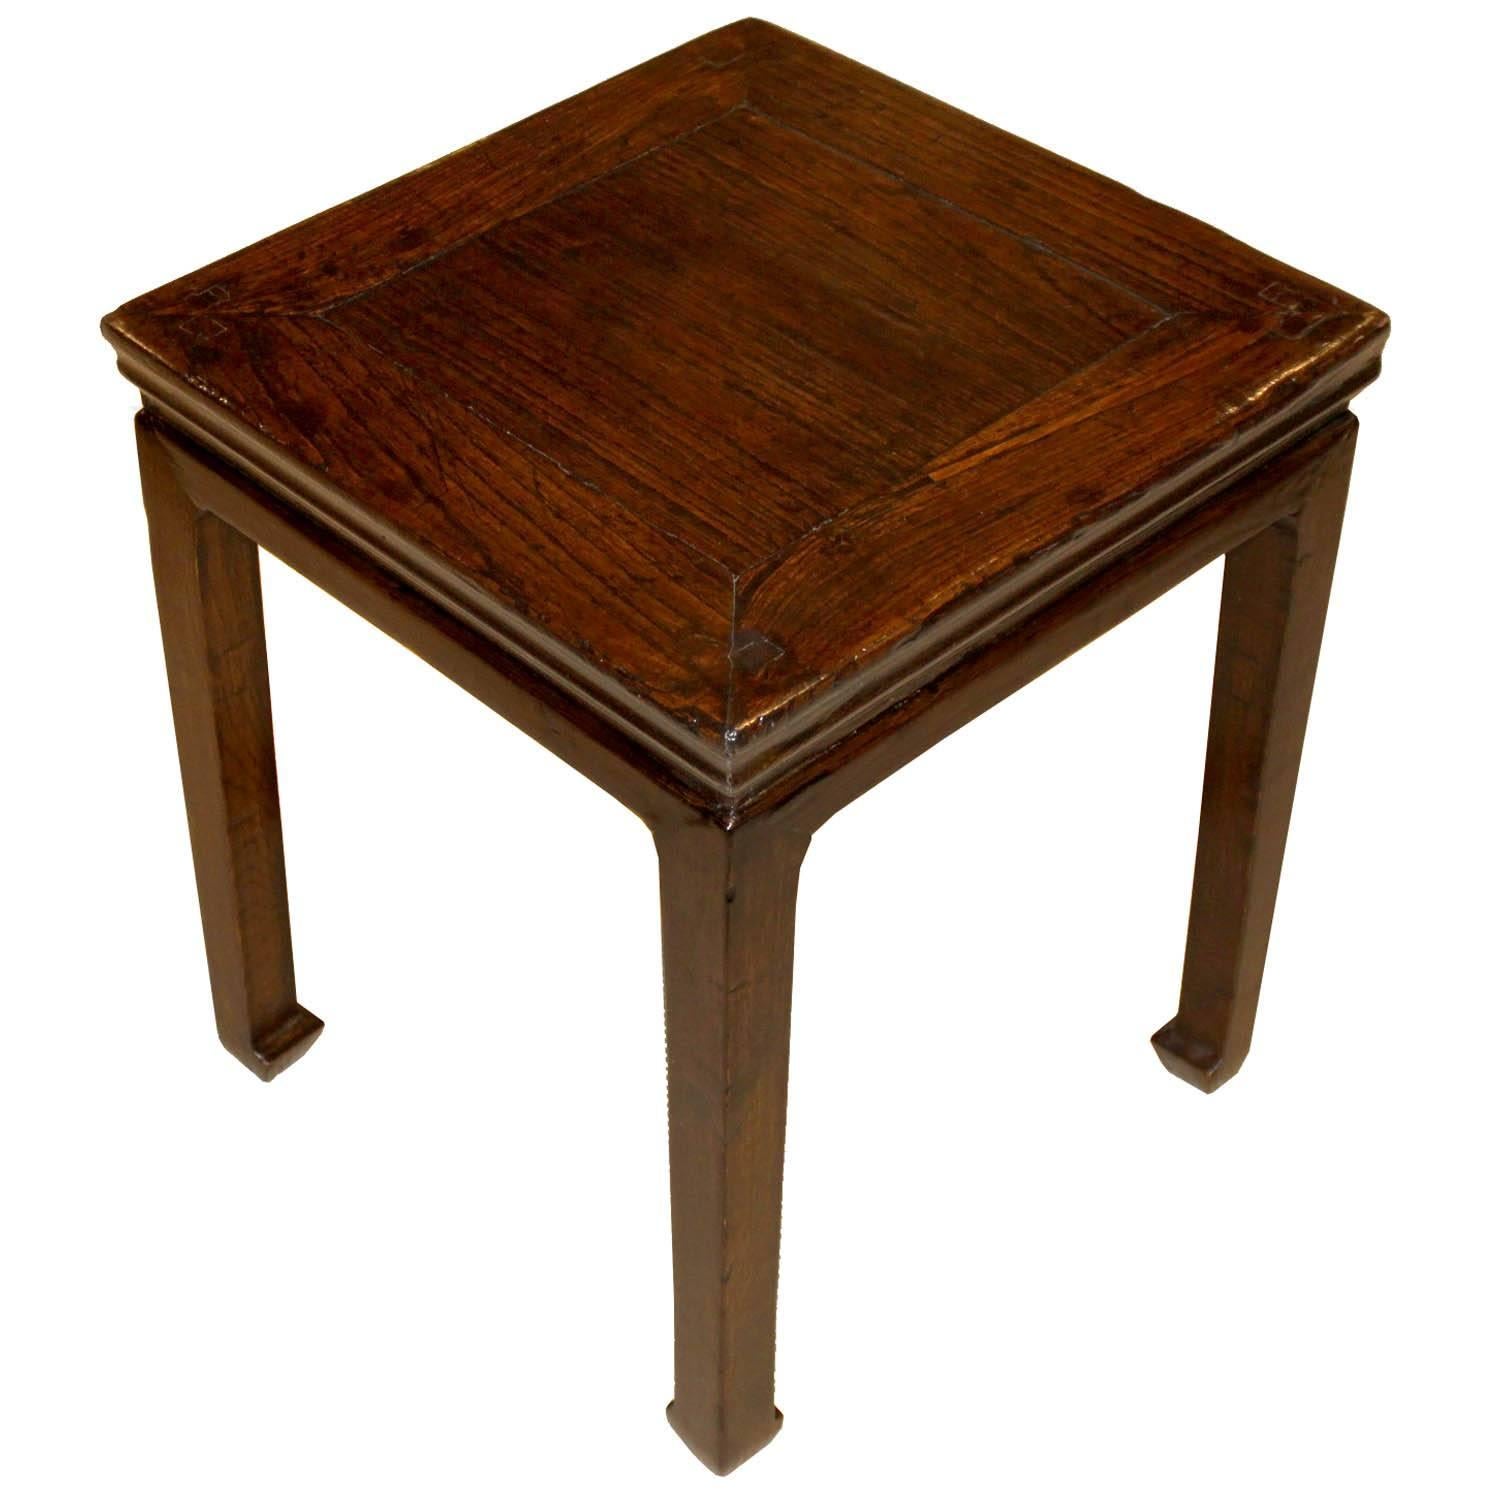 Elm Ming style side table with beautiful elm grain has a recessed top and elegant horse-hoof feet. Versatile to use as coffee tables in front of a sofa or as side tables next to armchairs.